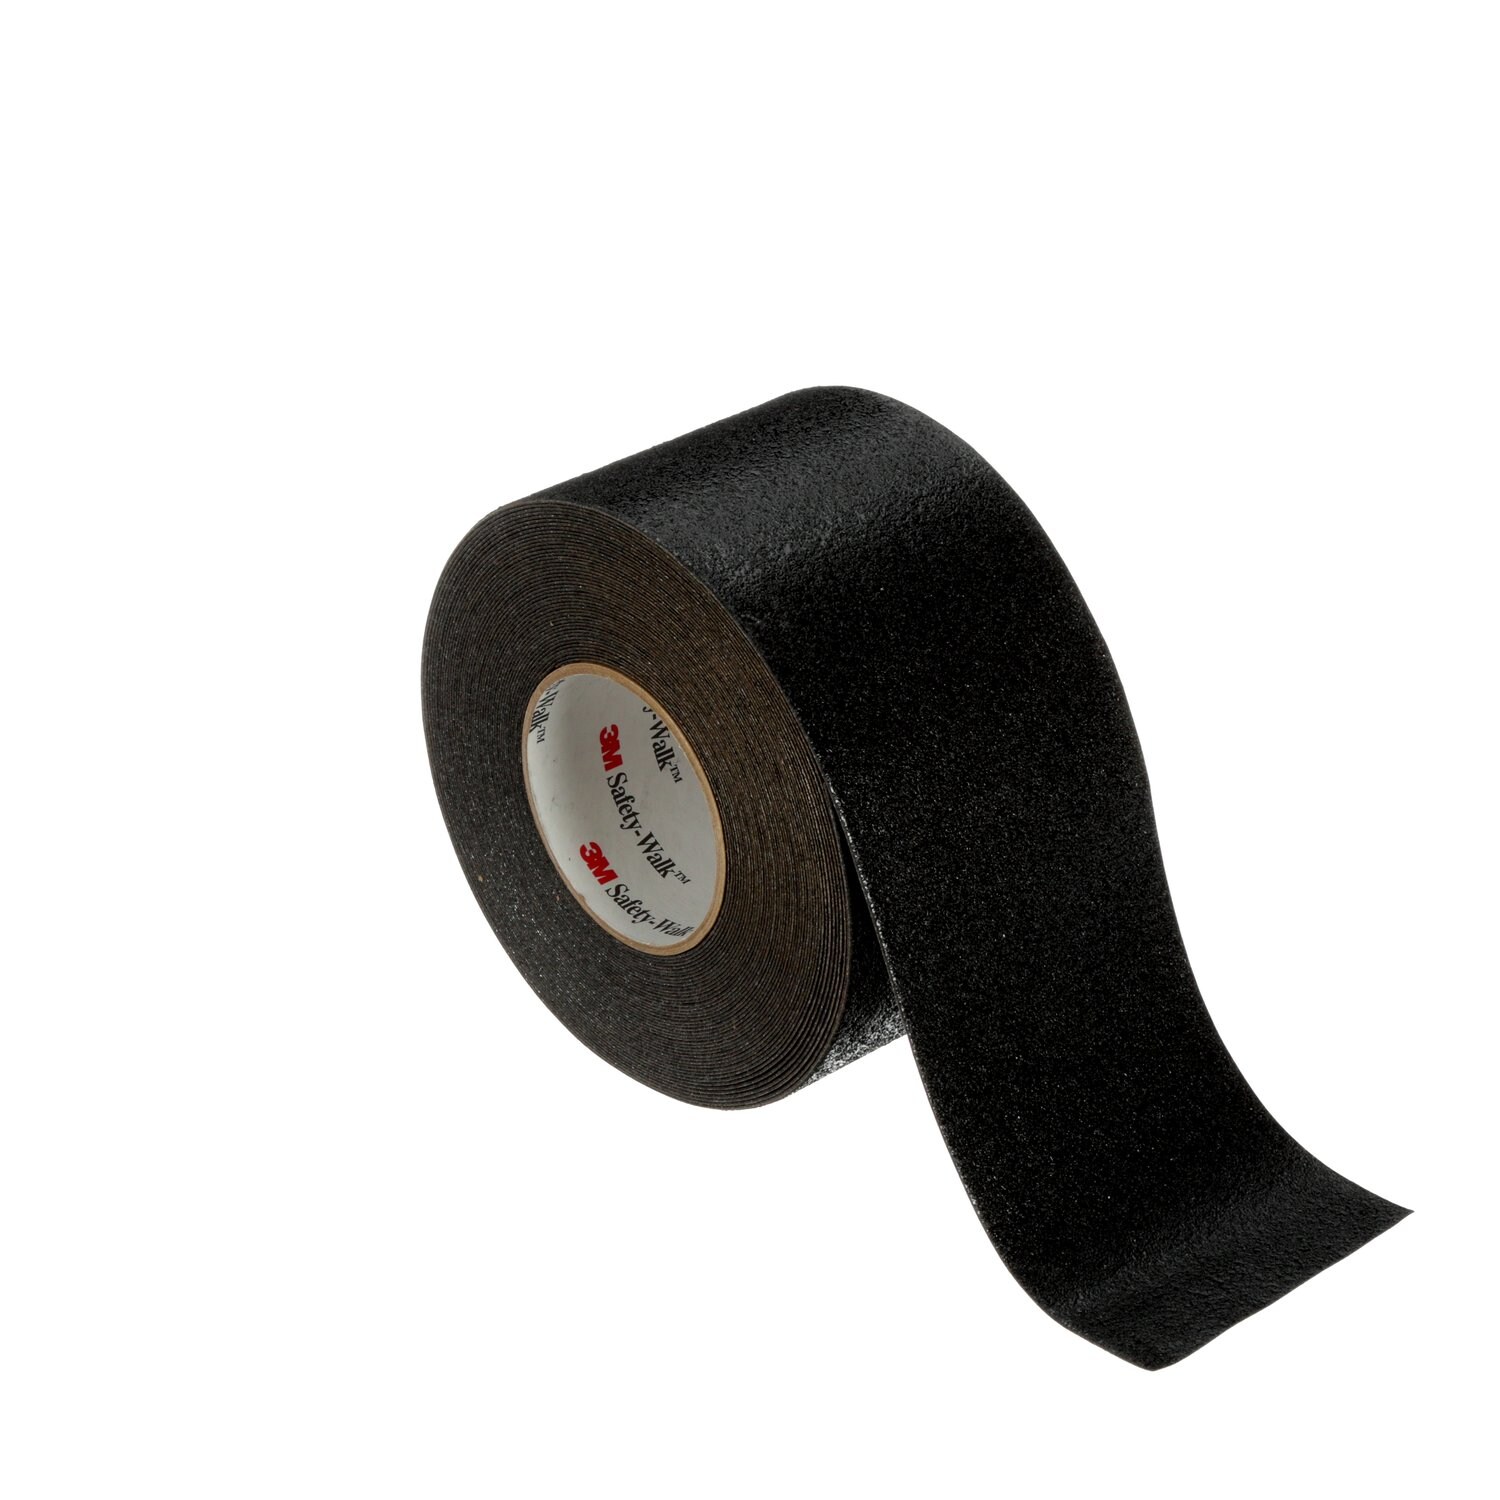 7000126117 - 3M Safety-Walk Slip-Resistant Conformable Tapes & Treads 510, Black, 4
in x 60 ft, Roll, 1/Case